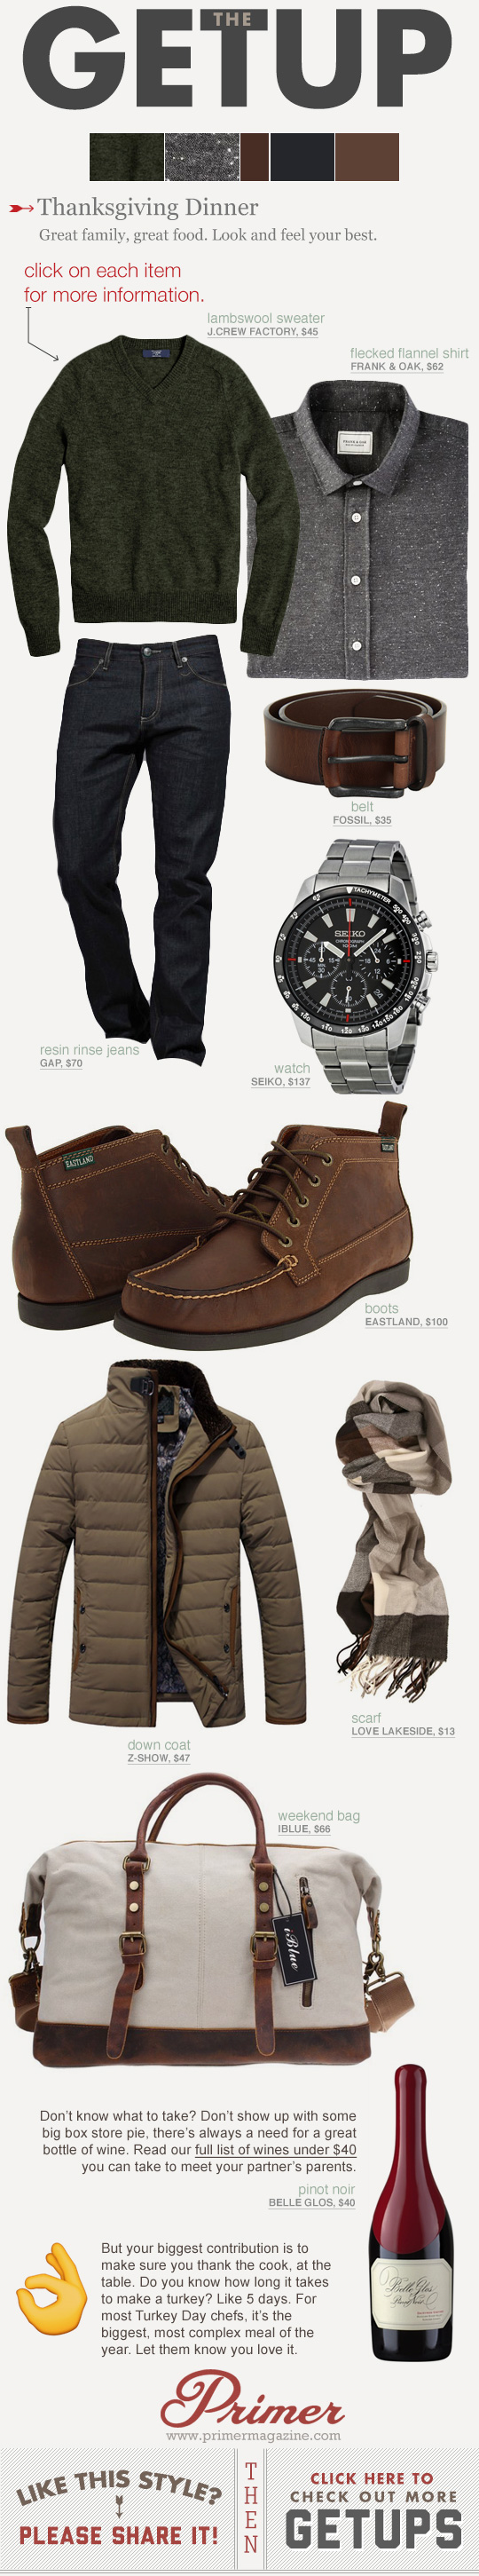 Getup outfit inspiration with green sweater, jeans, and moc toe boots